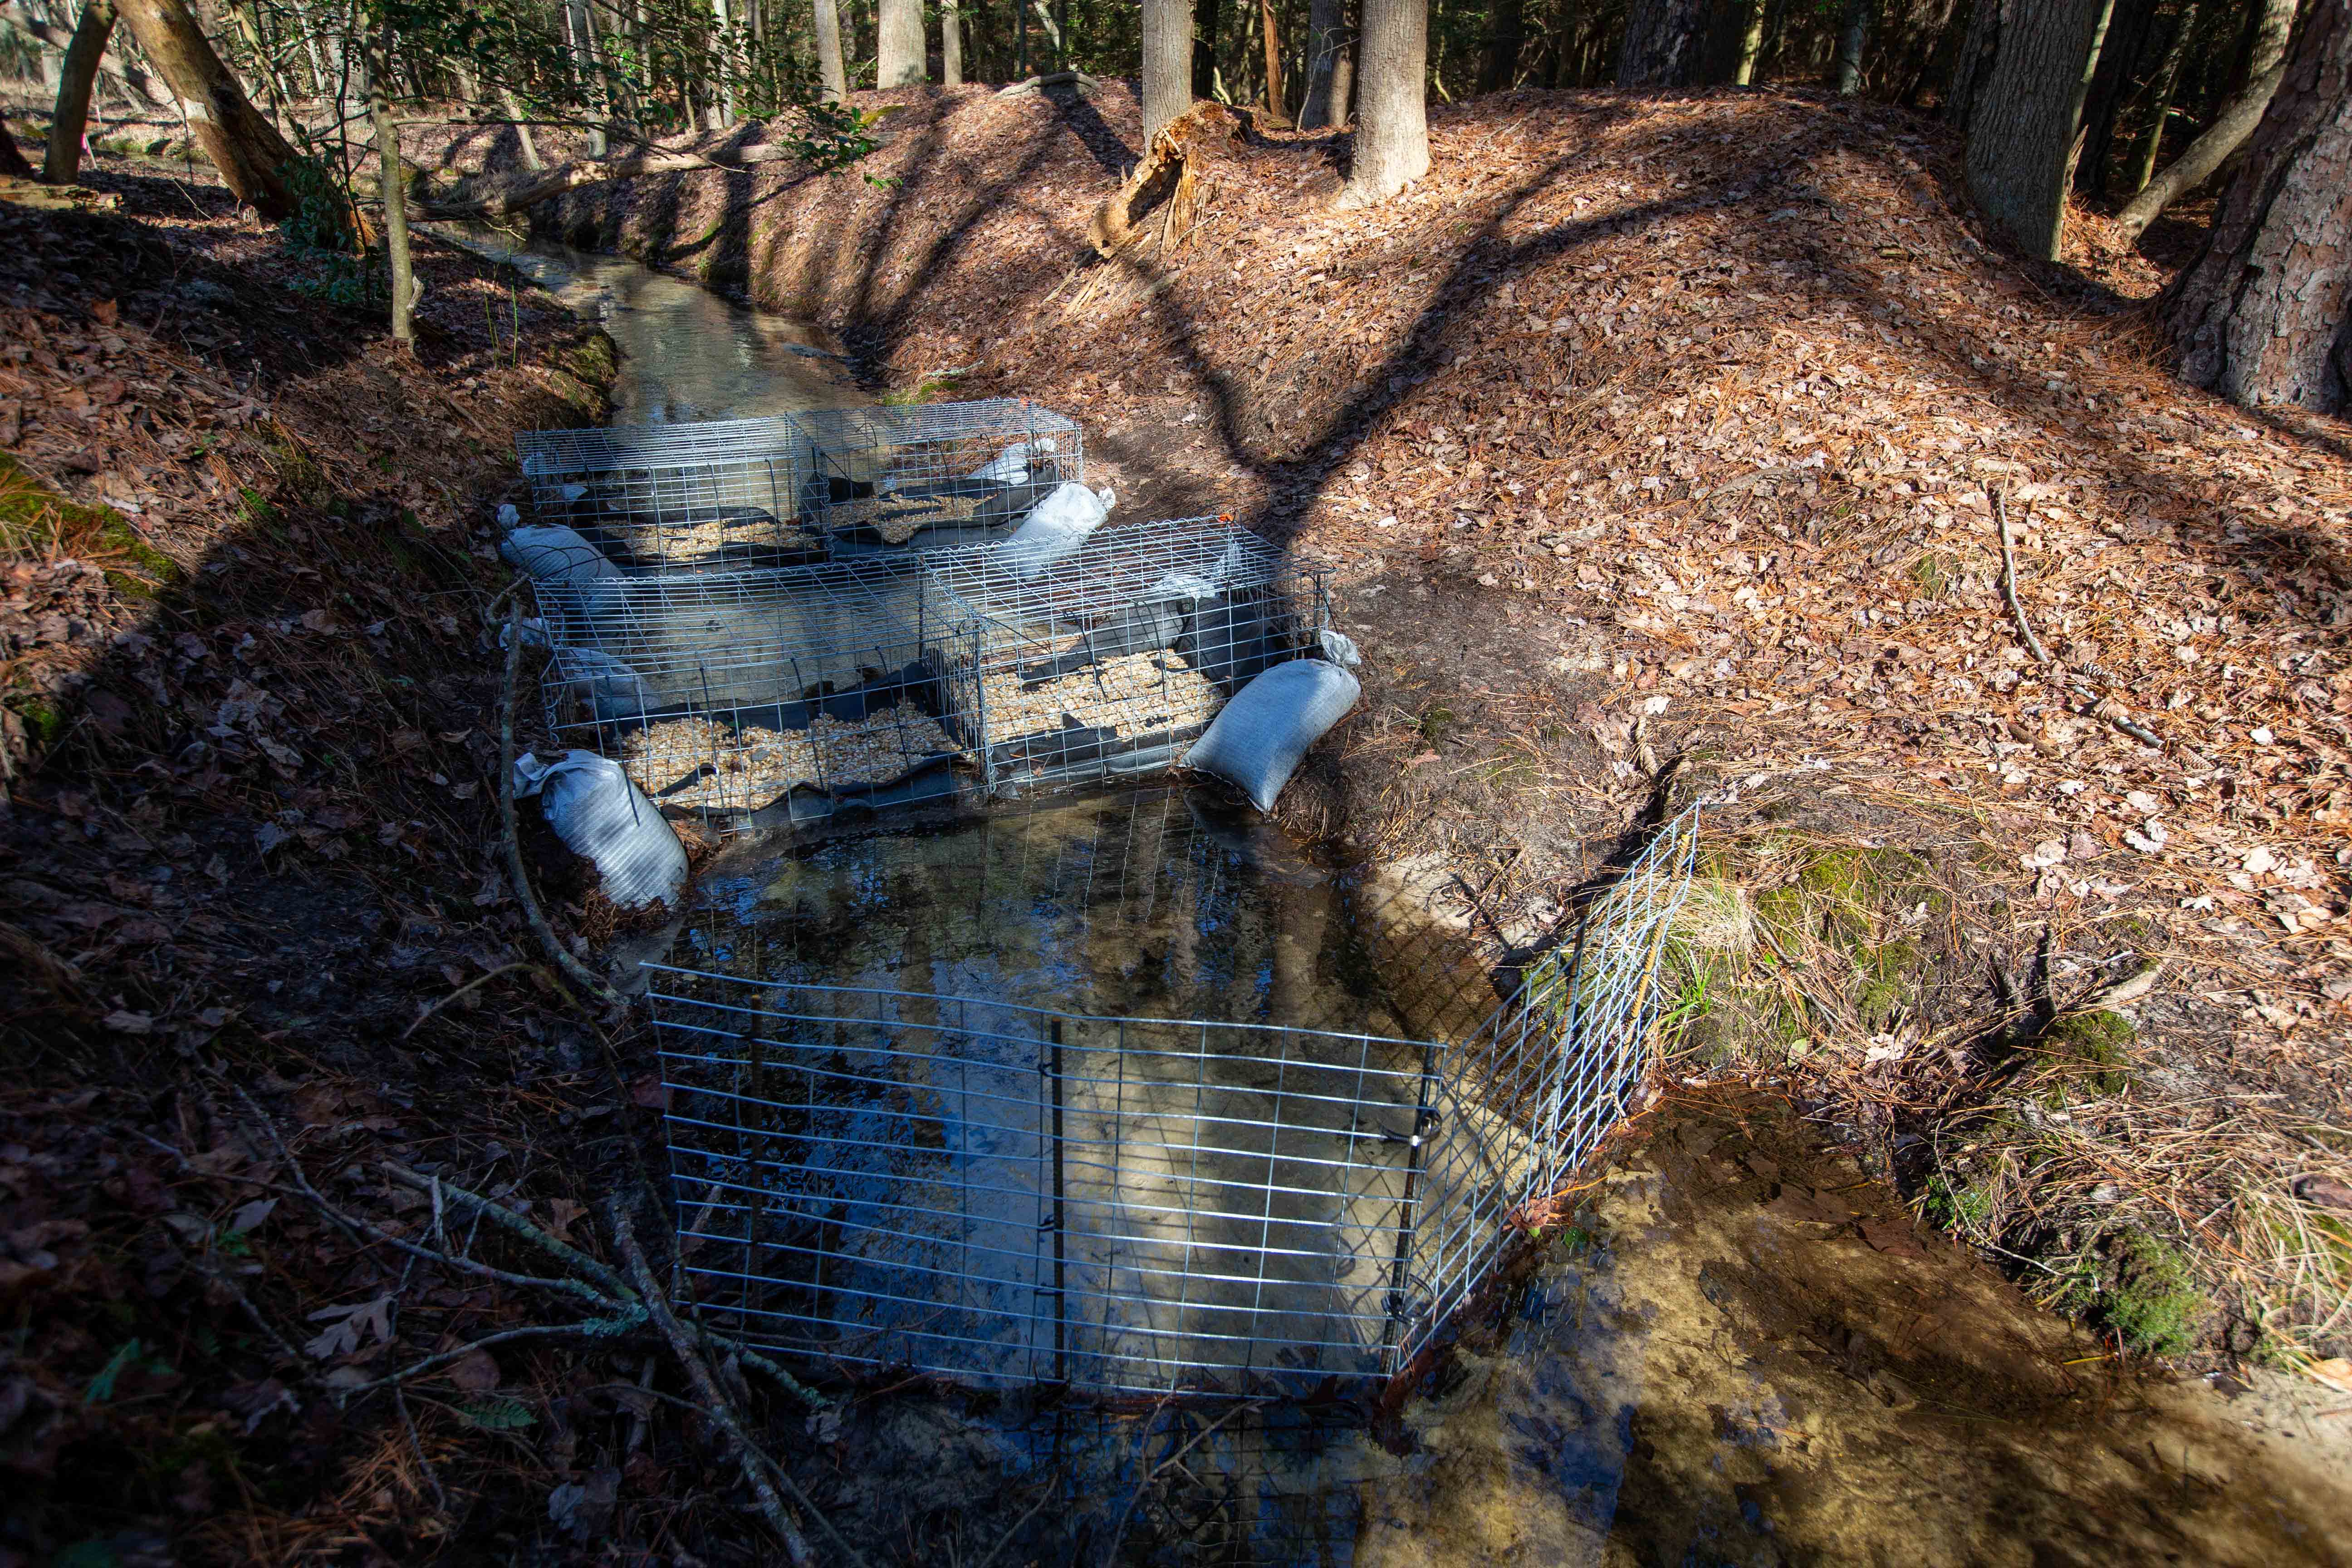 A stream running through a forested area with multiple wire cages .